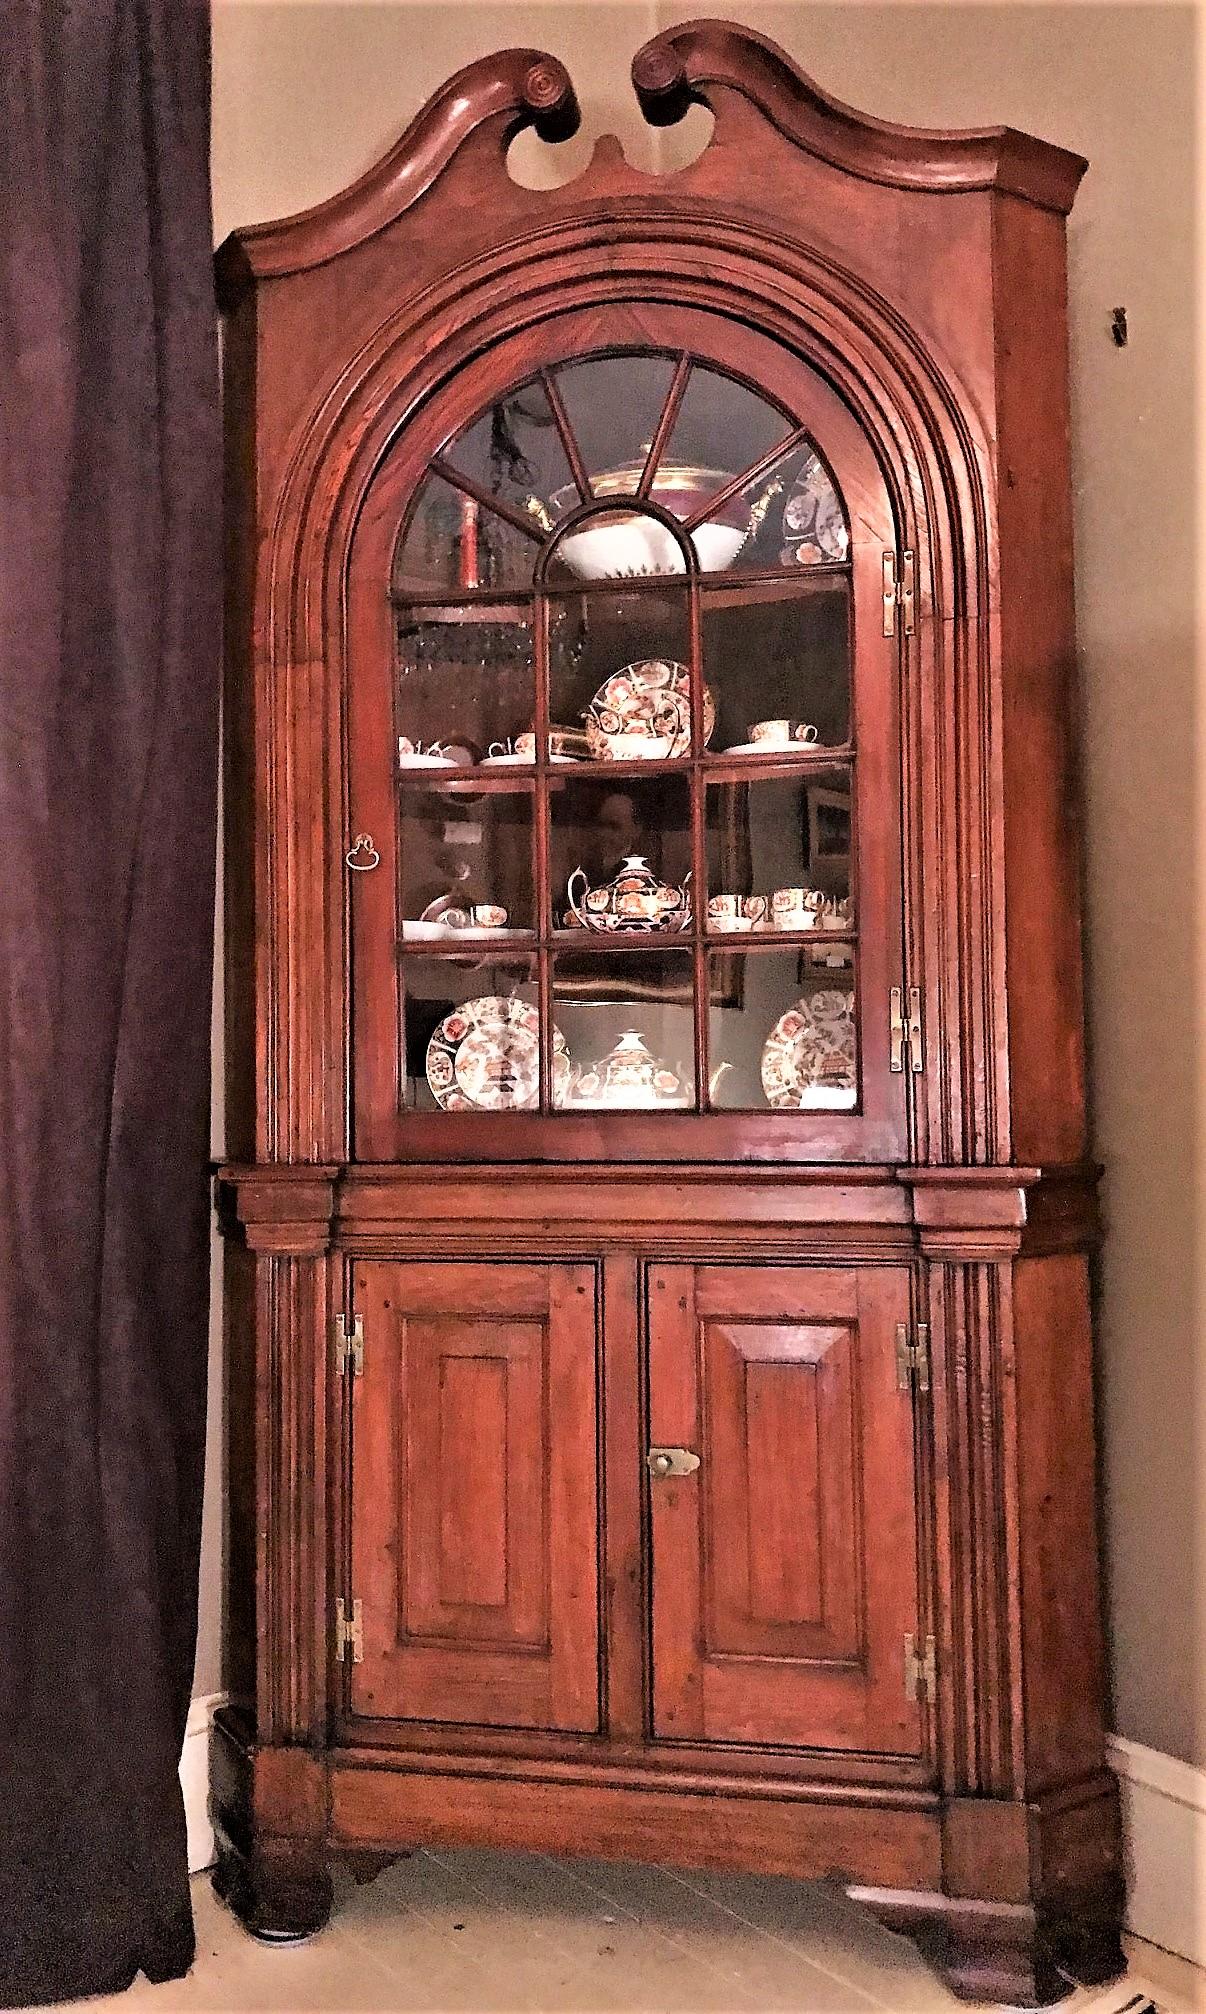 This late Georgian pine corner cupboard, more than 200 years old, bears all the hallmarks of a piece of architectural detail from a circa 1815 house of a wealthy Virginian of the era. It was long ago converted into a piece of free-standing